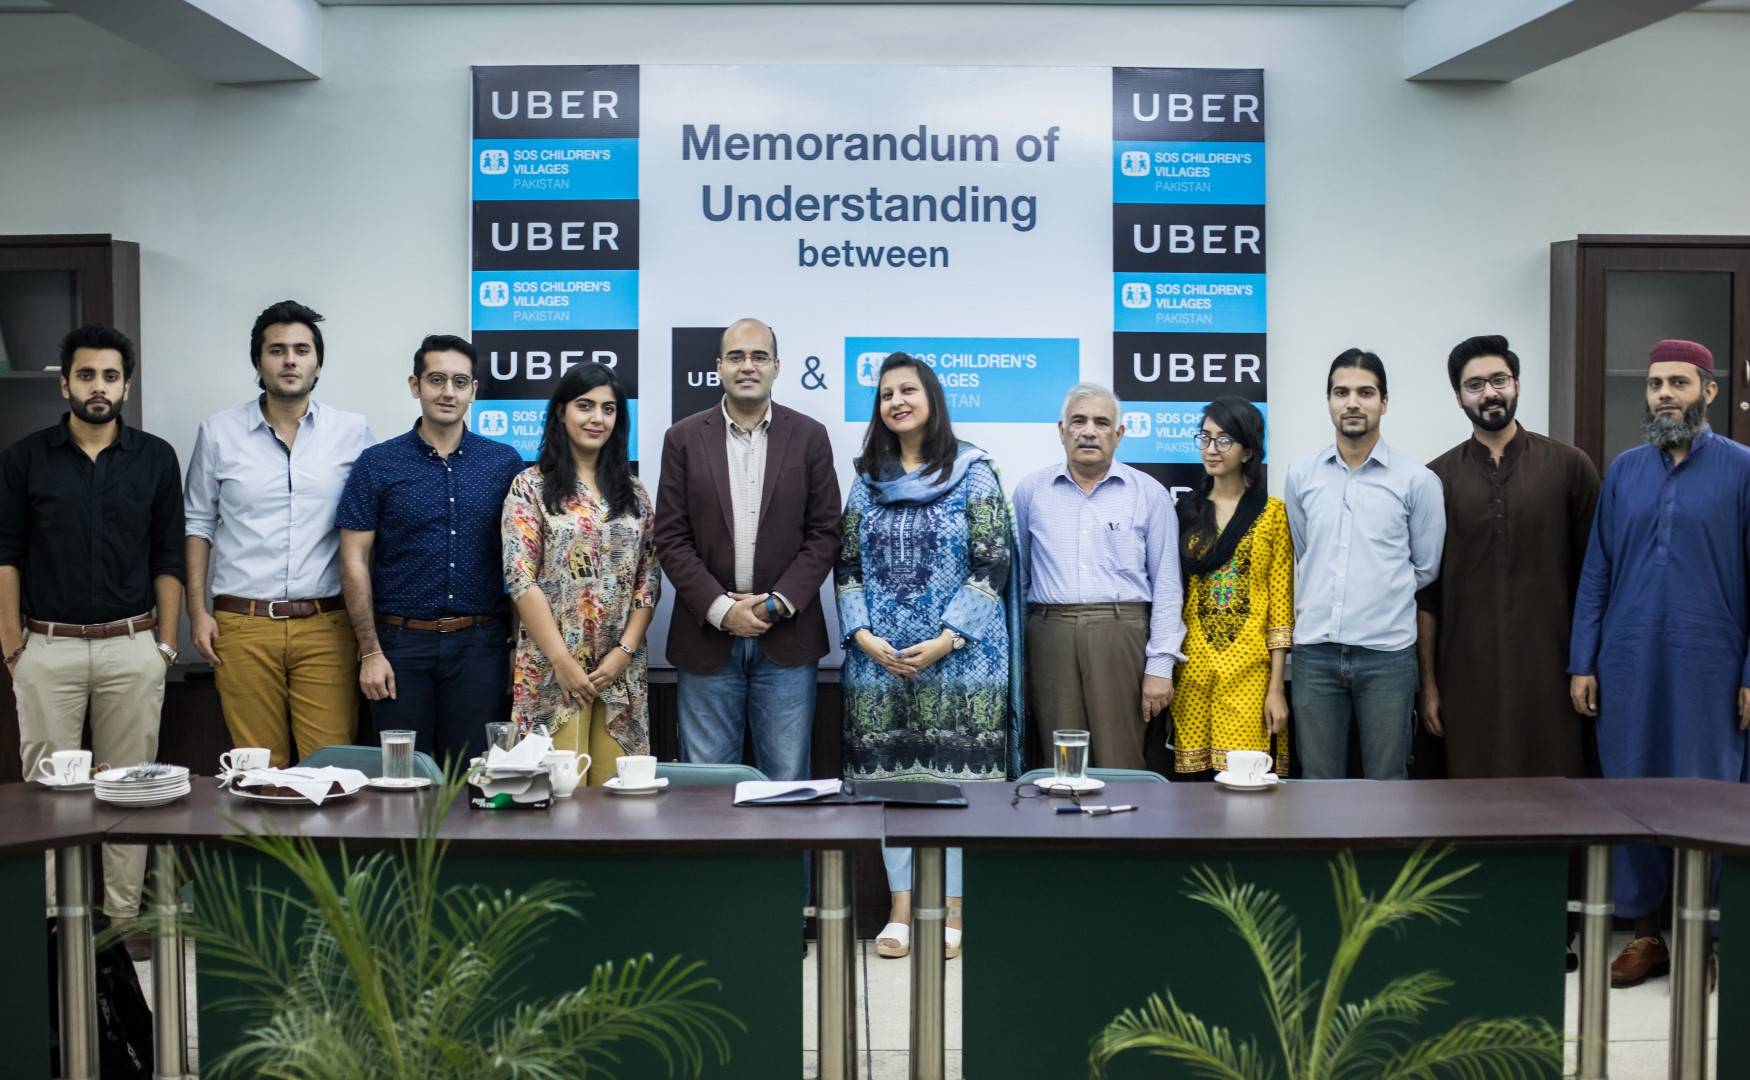 Uber Pakistan join hands with SOS Children’s Villages as part of its long-term commitment to digitally empower communities